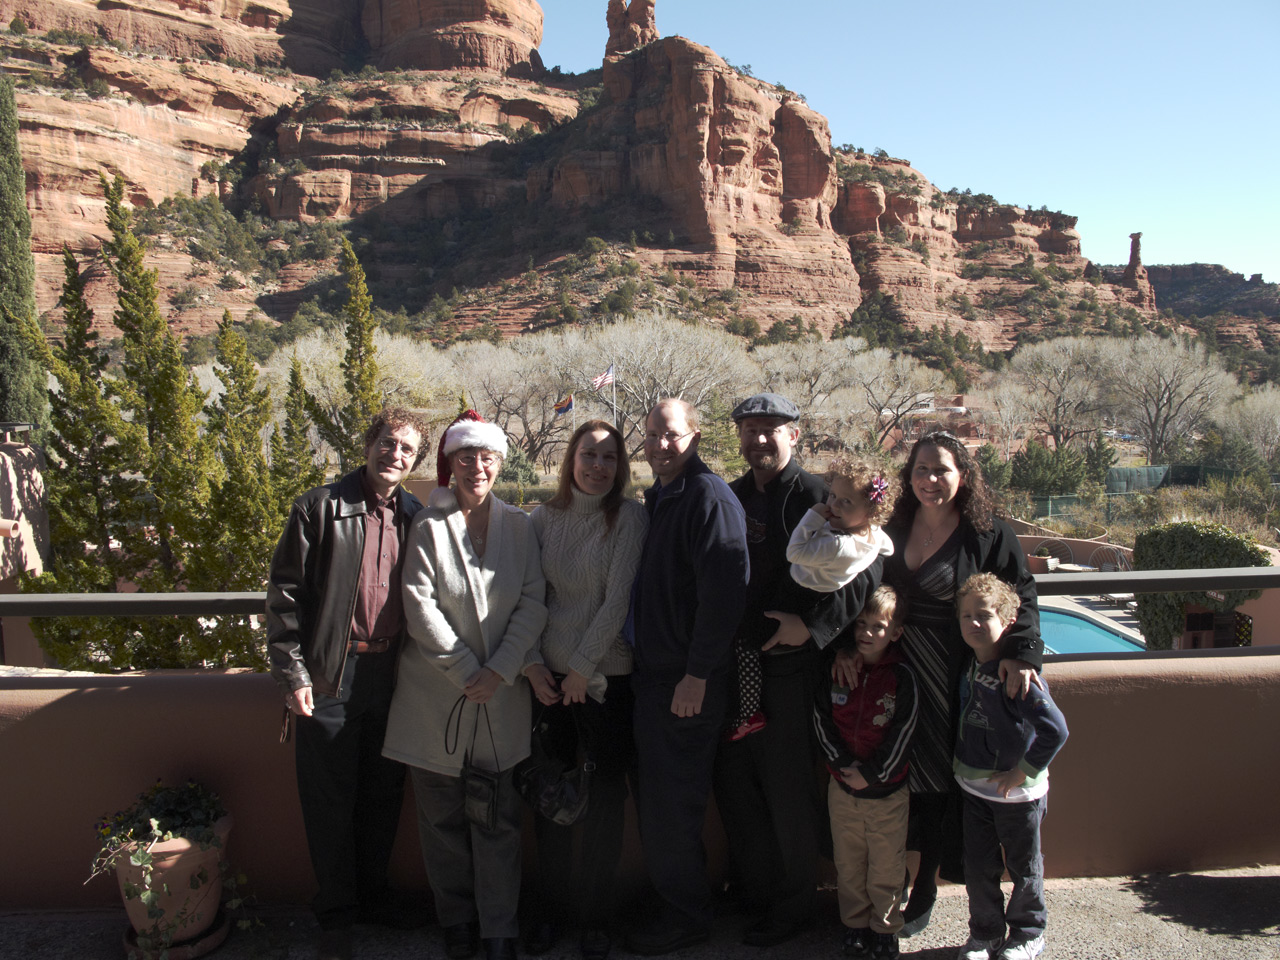 Me and Adele, Keri and Marc, Steve holding Sophia, James and John and Jackie at YAVAPAI Restaurant in ENCHANTMENT RESORT